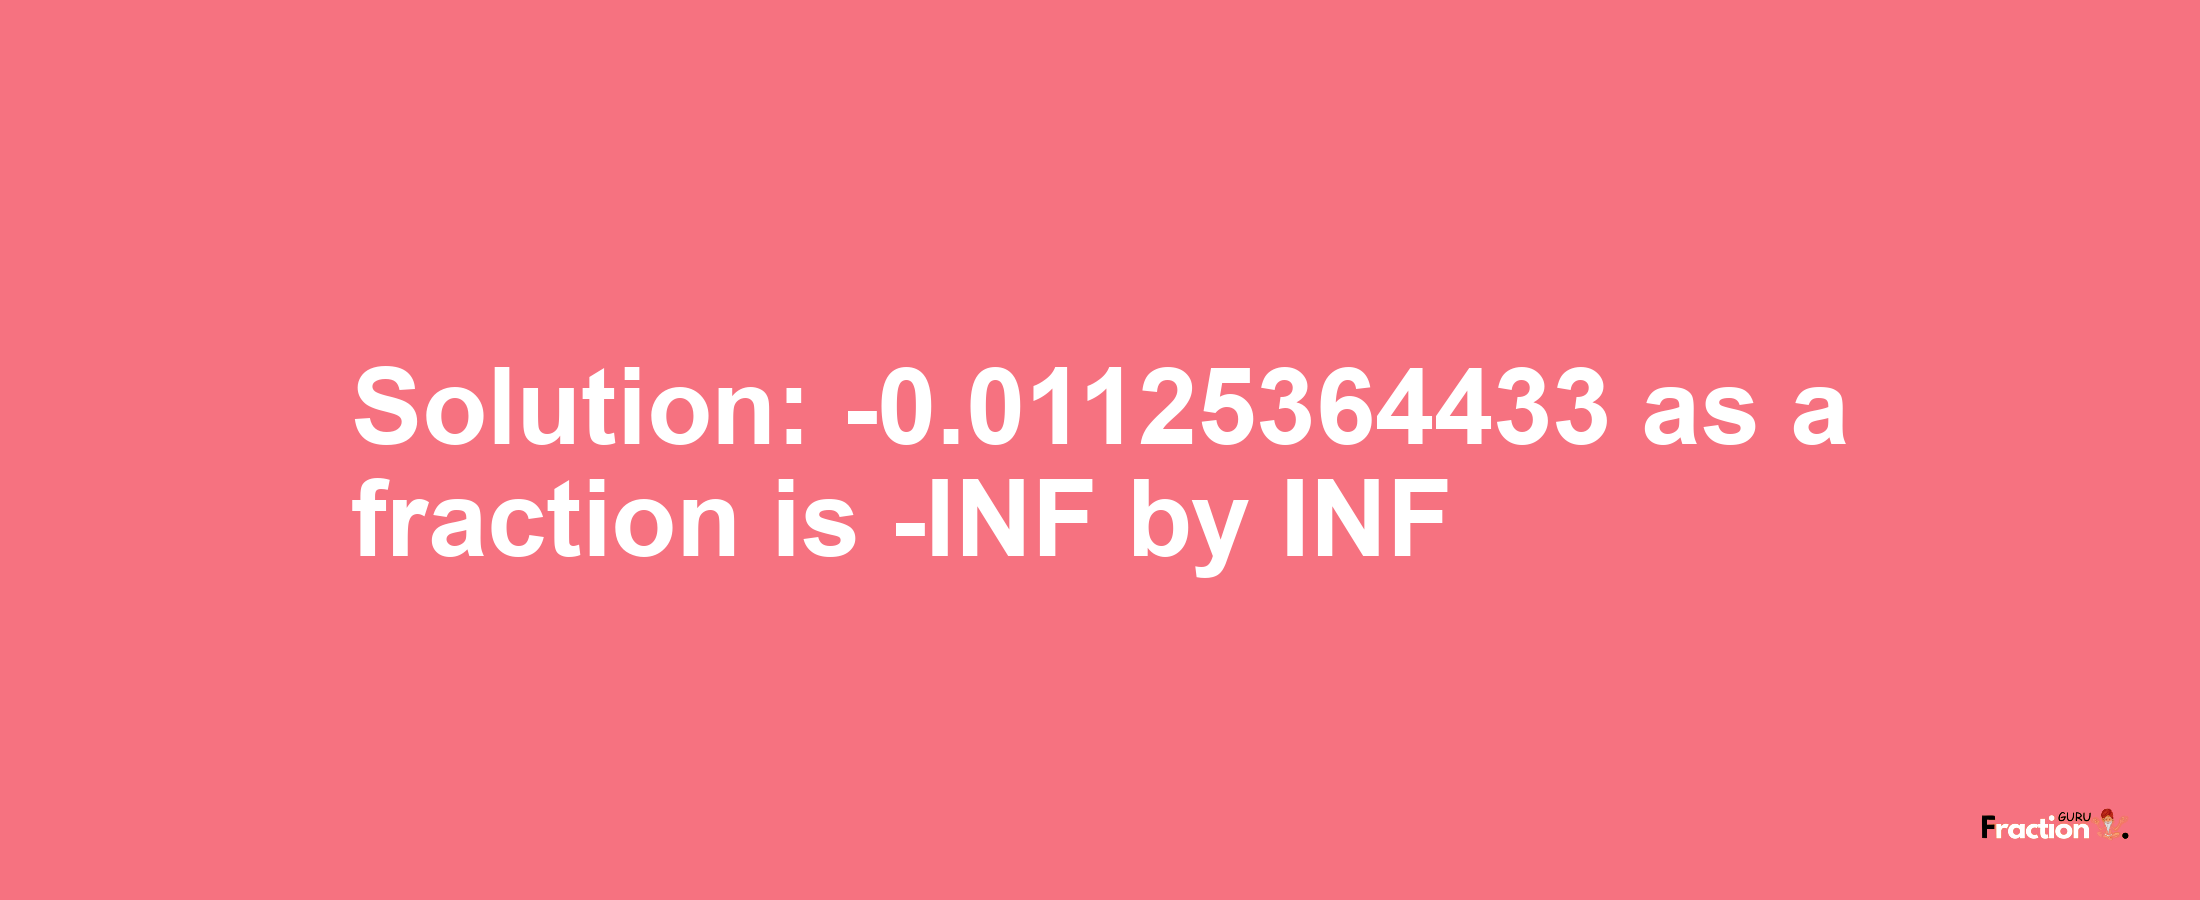 Solution:-0.01125364433 as a fraction is -INF/INF